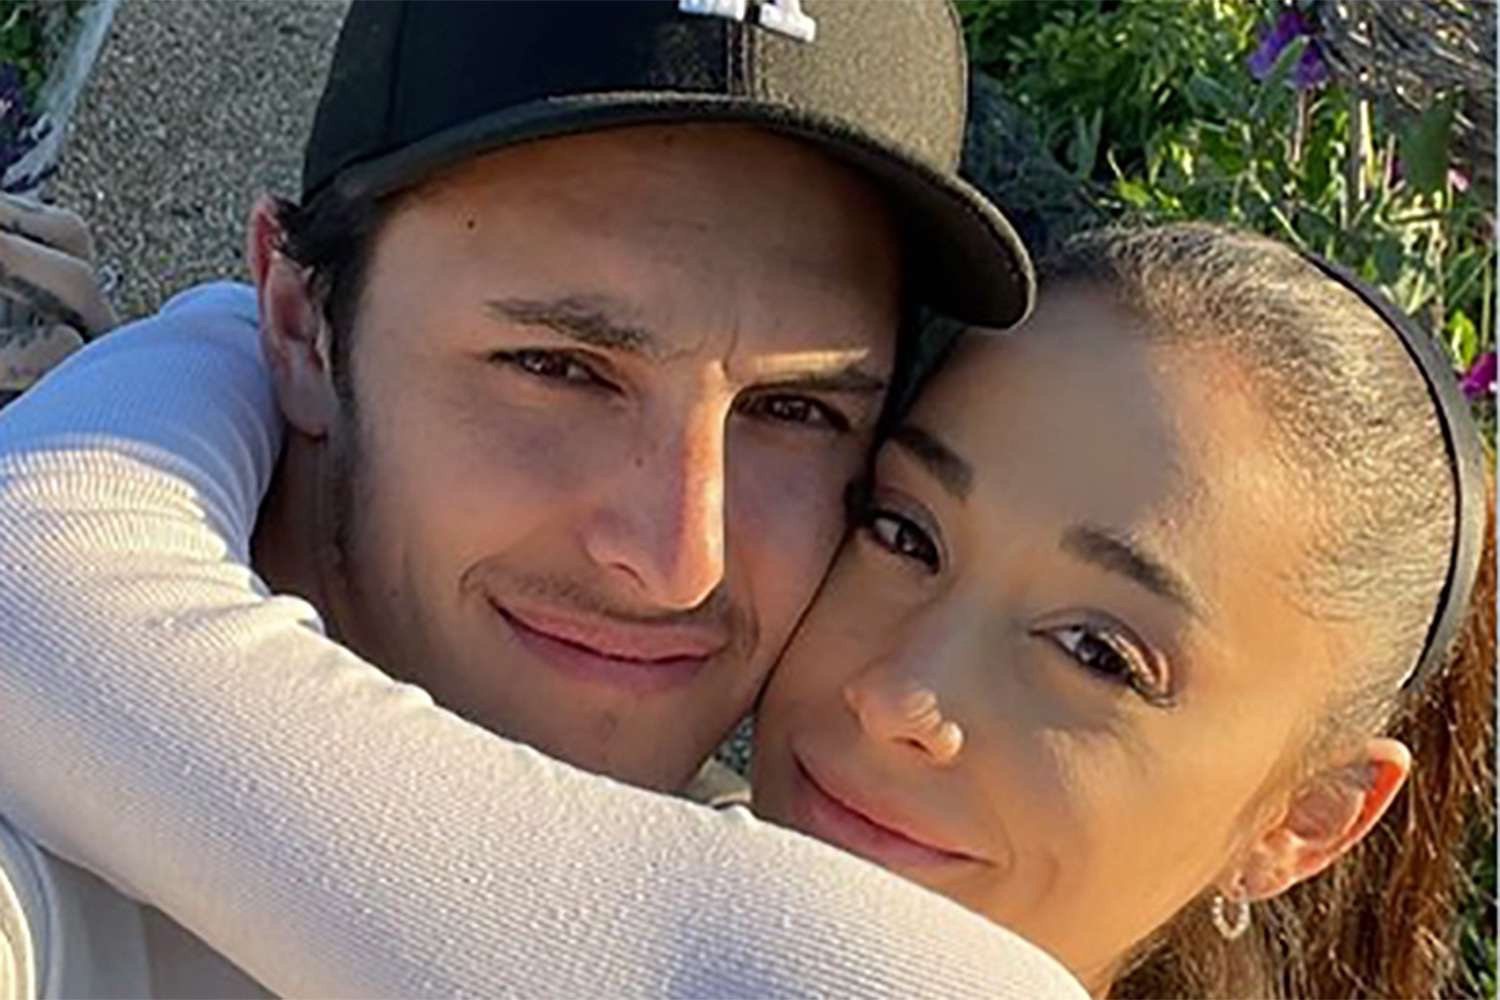 Ariana Grande And Dalton Gomez Split After 2 Years Of Marriage